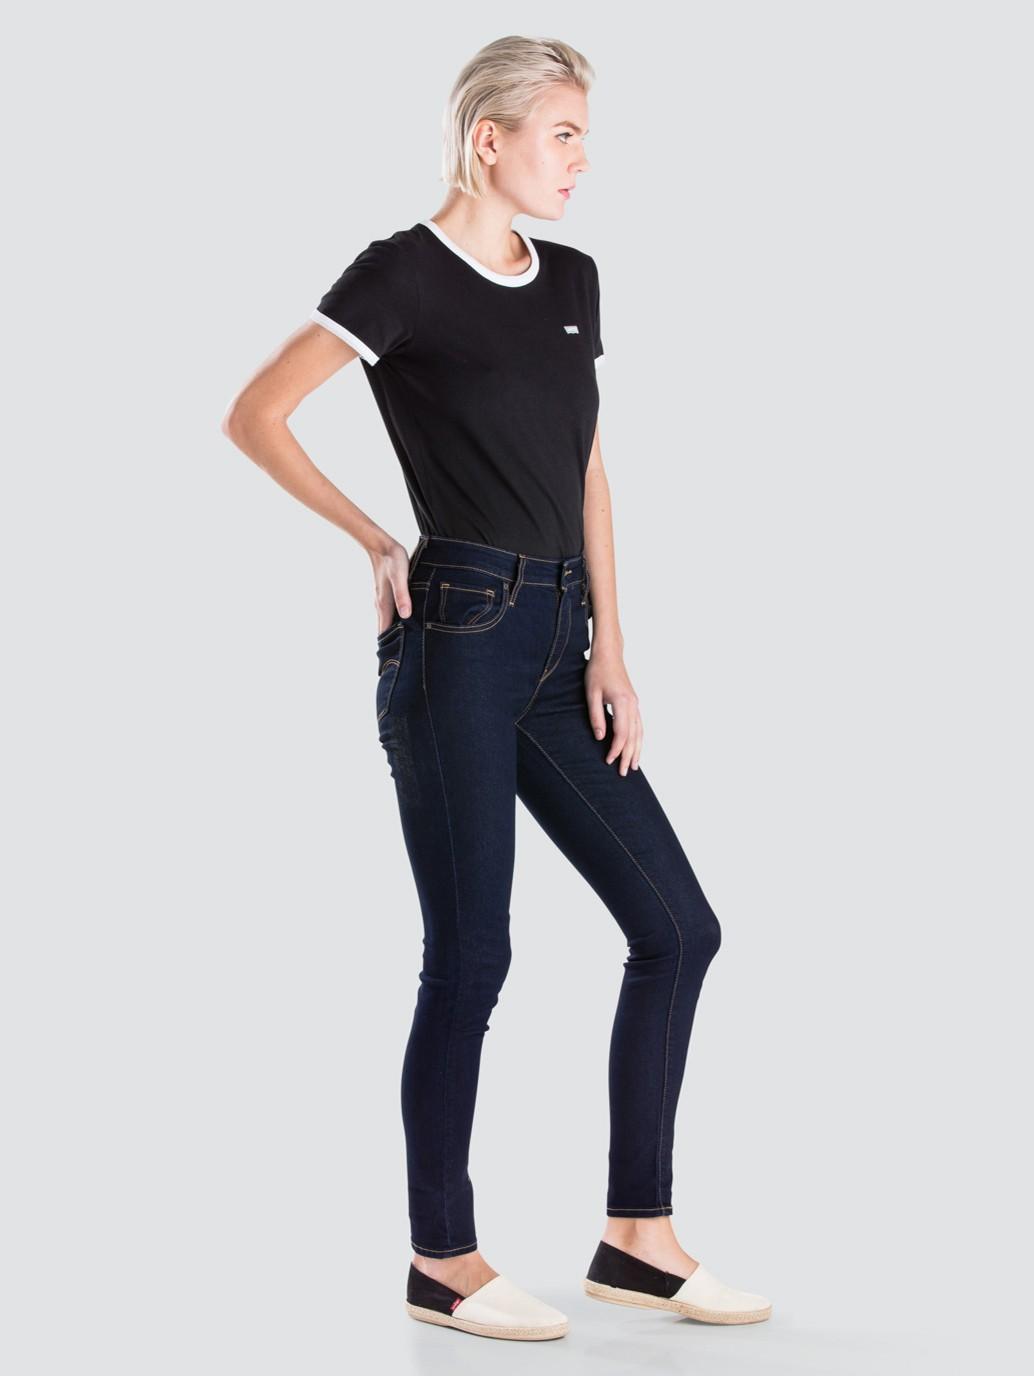 levis malaysia Levis 721 High Rise Skinny Jeans 188820023 03 Side